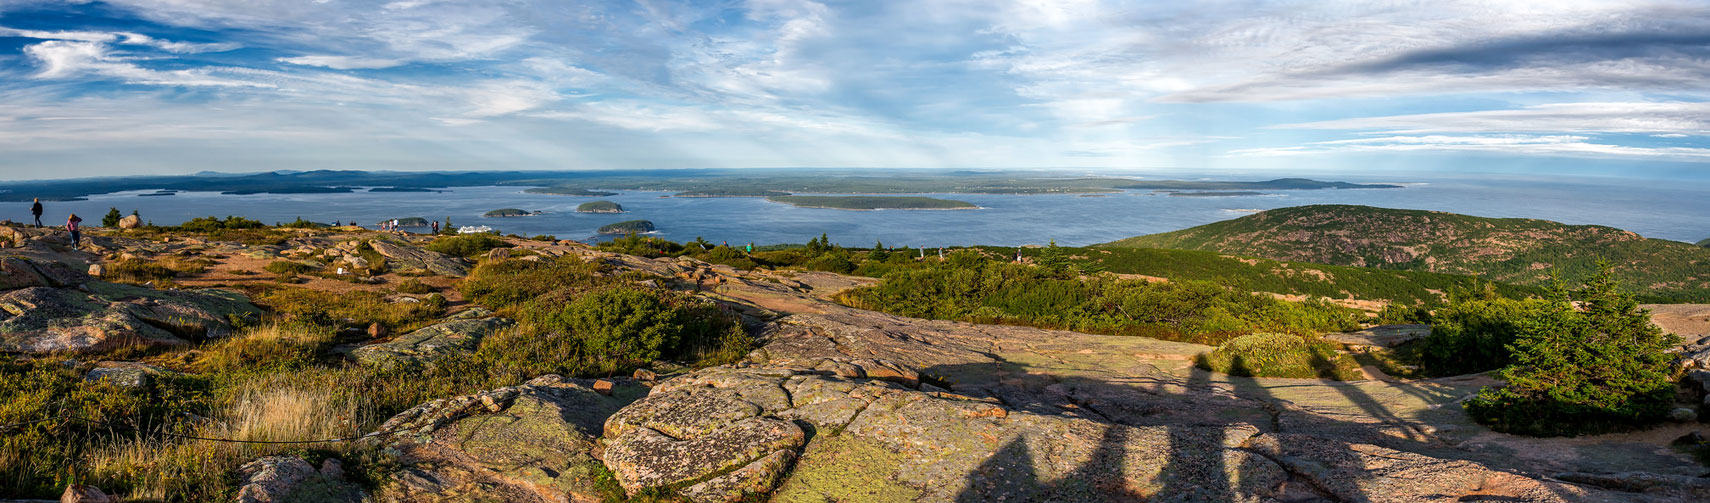 View from Cadillac Mountain on Mount Desert Island in Maine